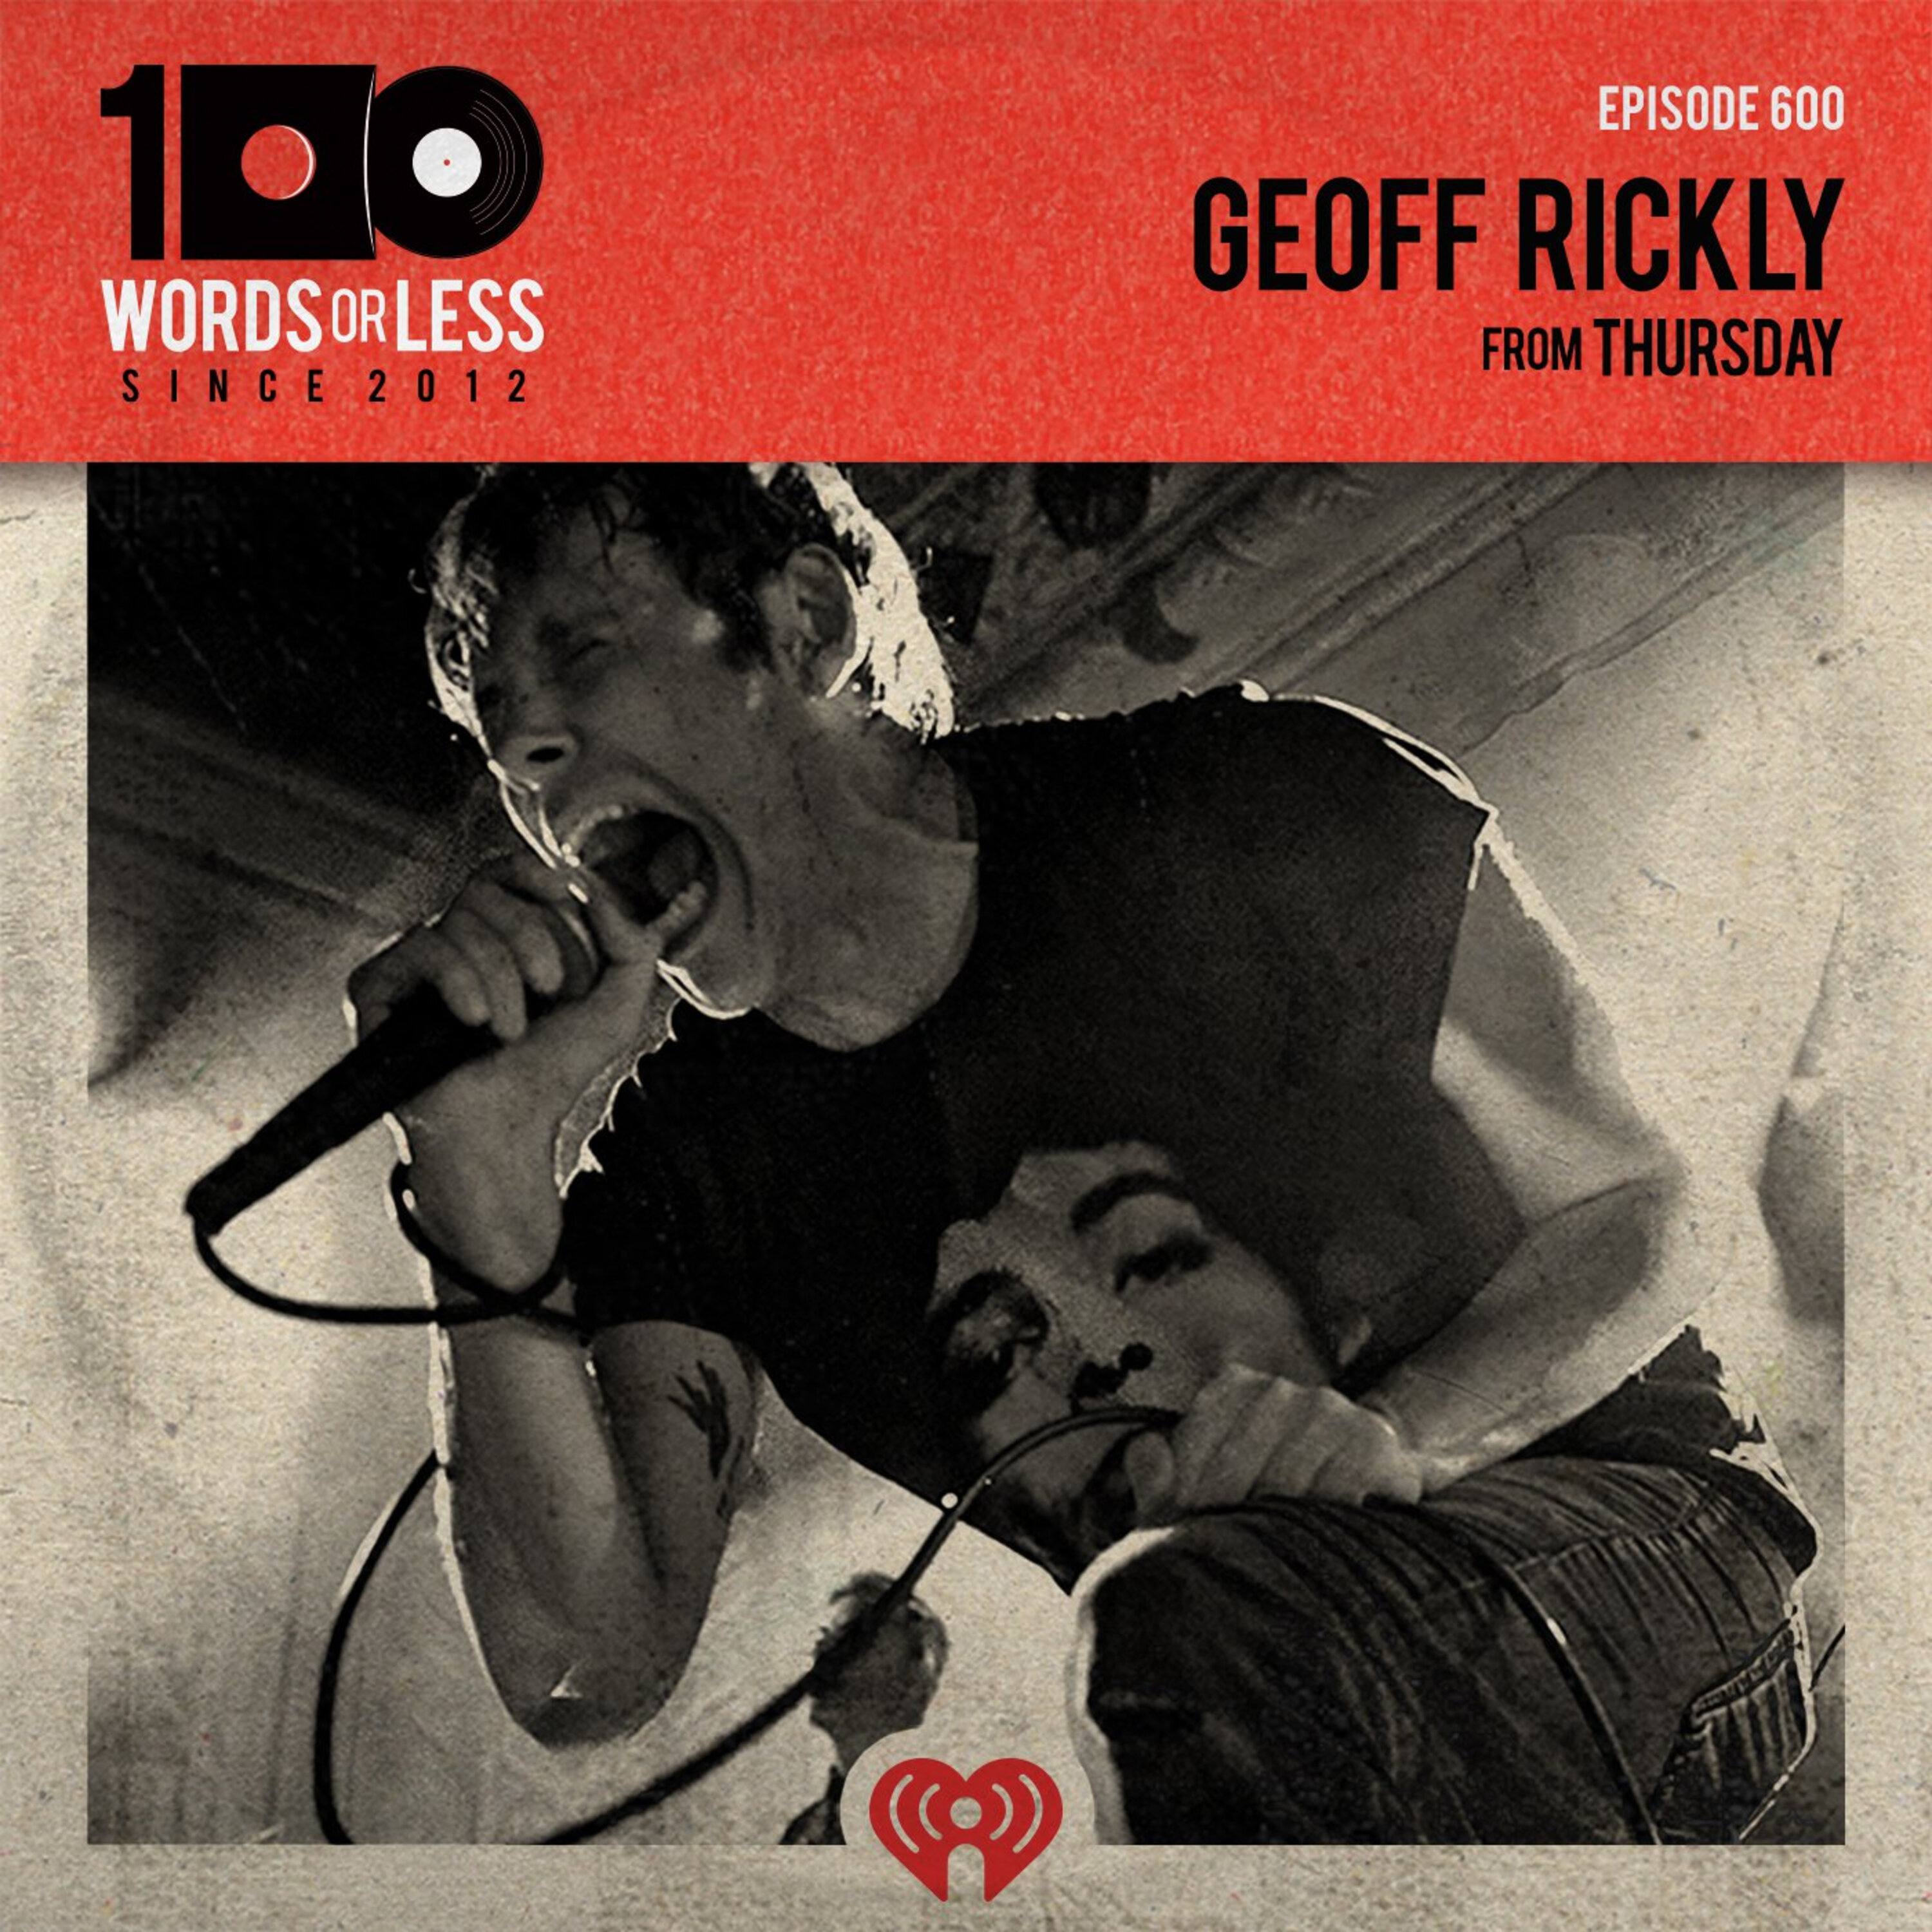 Geoff Rickly from Thursday